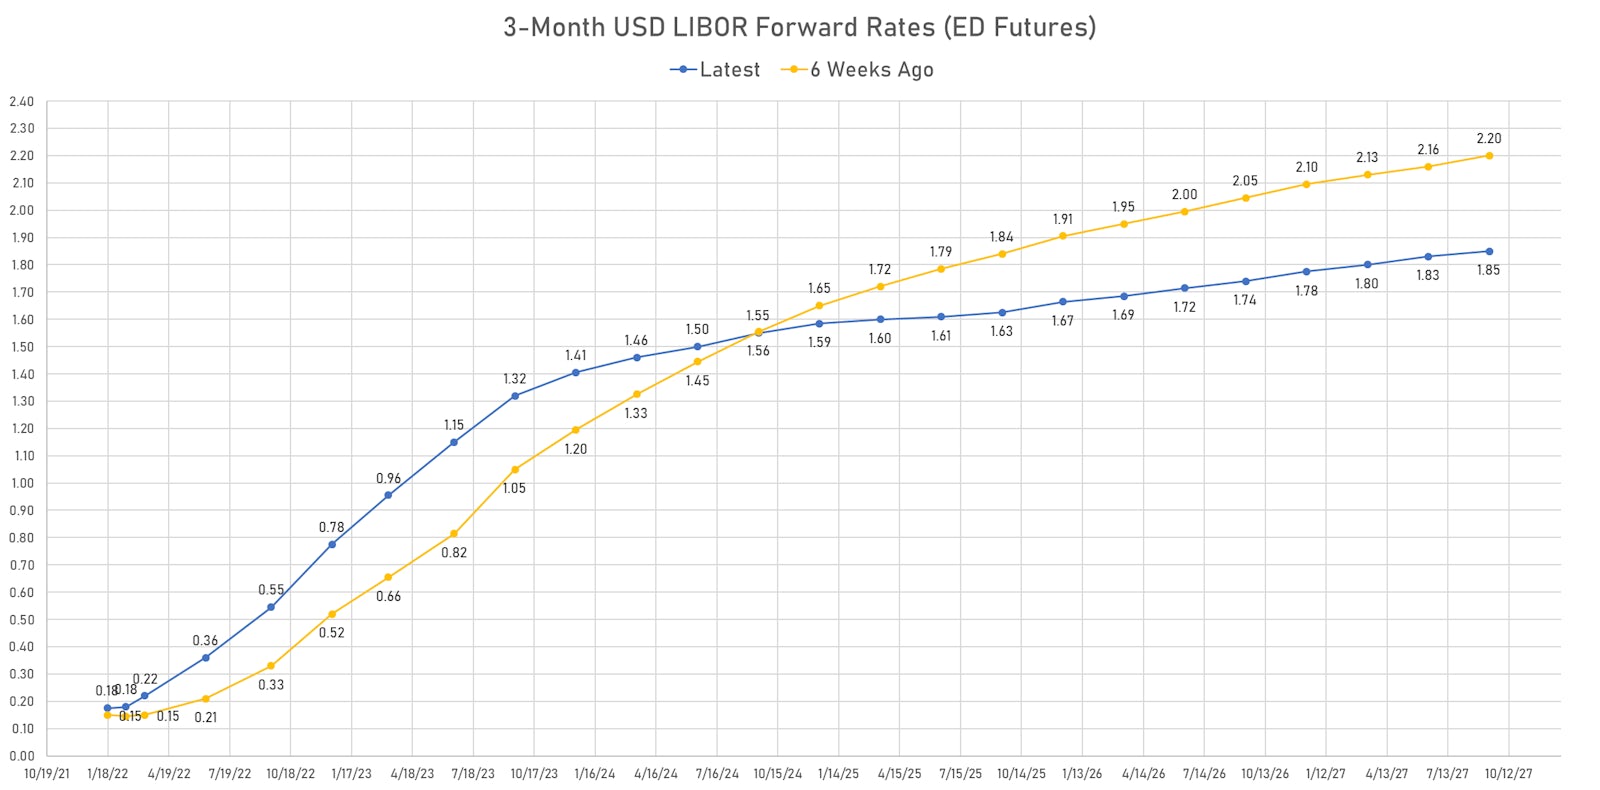 Recent Changes In Eurodollar Futures Implied Yields | Sources: ϕpost, Refinitiv data